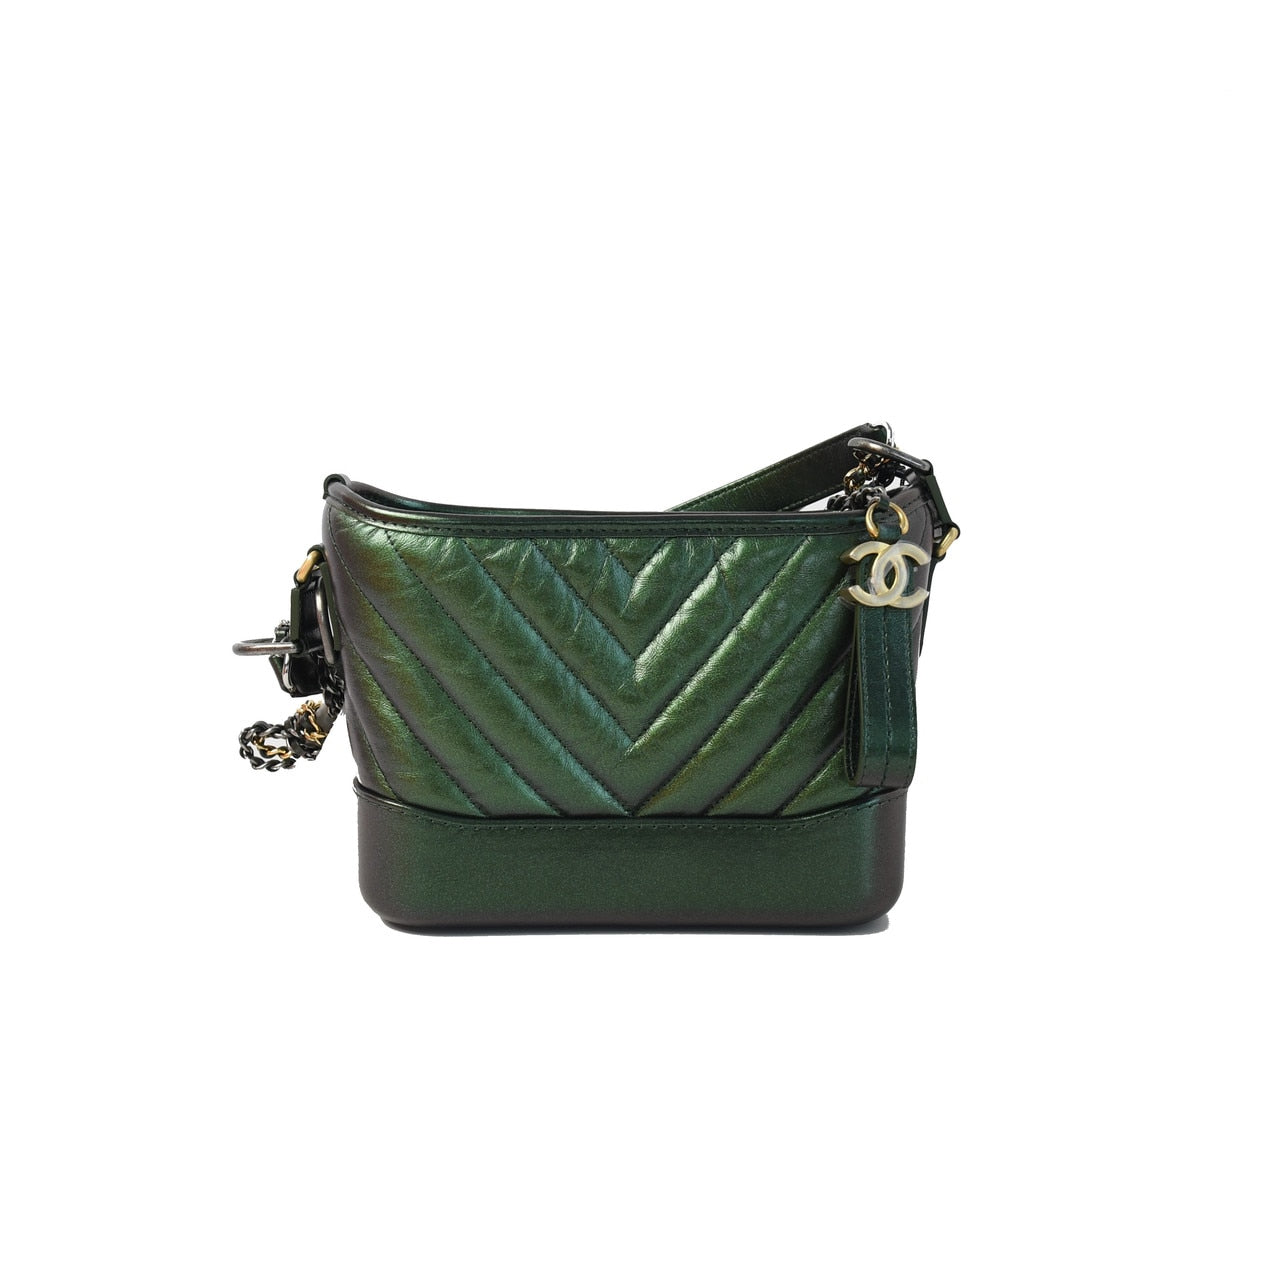 Chanel Gabrielle Large Aged Calf Green